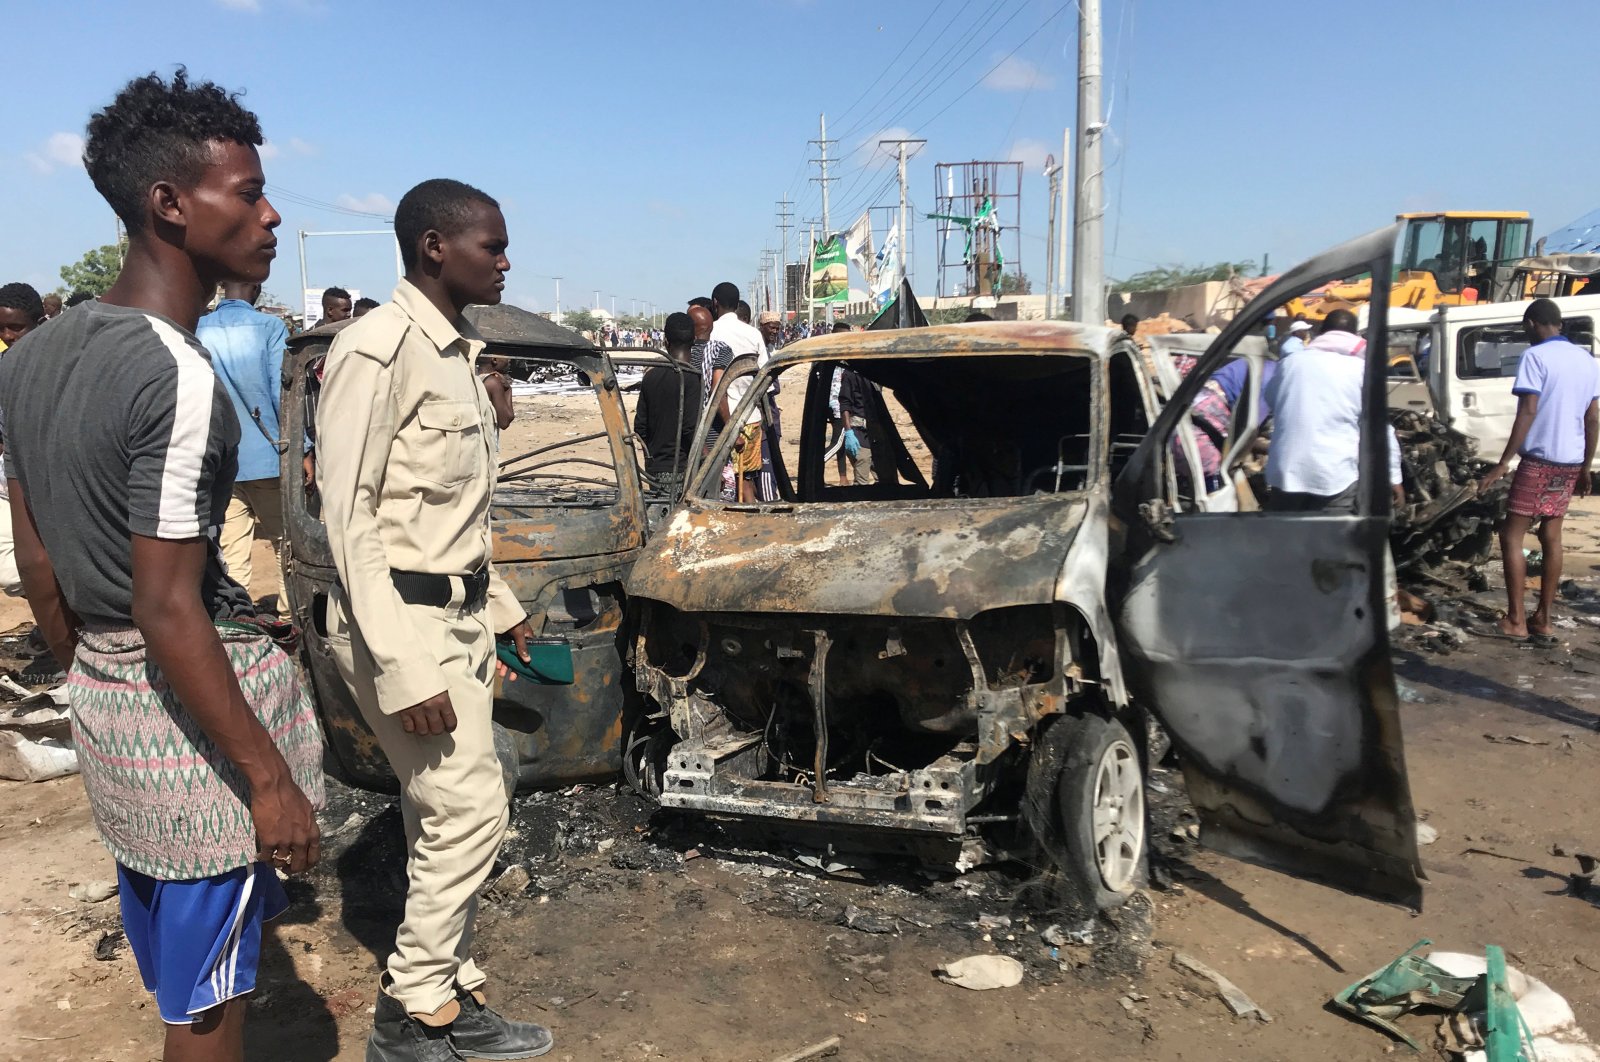 Somali security assesses the scene of a car bomb explosion at a checkpoint in Mogadishu, Somalia, Dec. 28, 2019. (Reuters Photo)